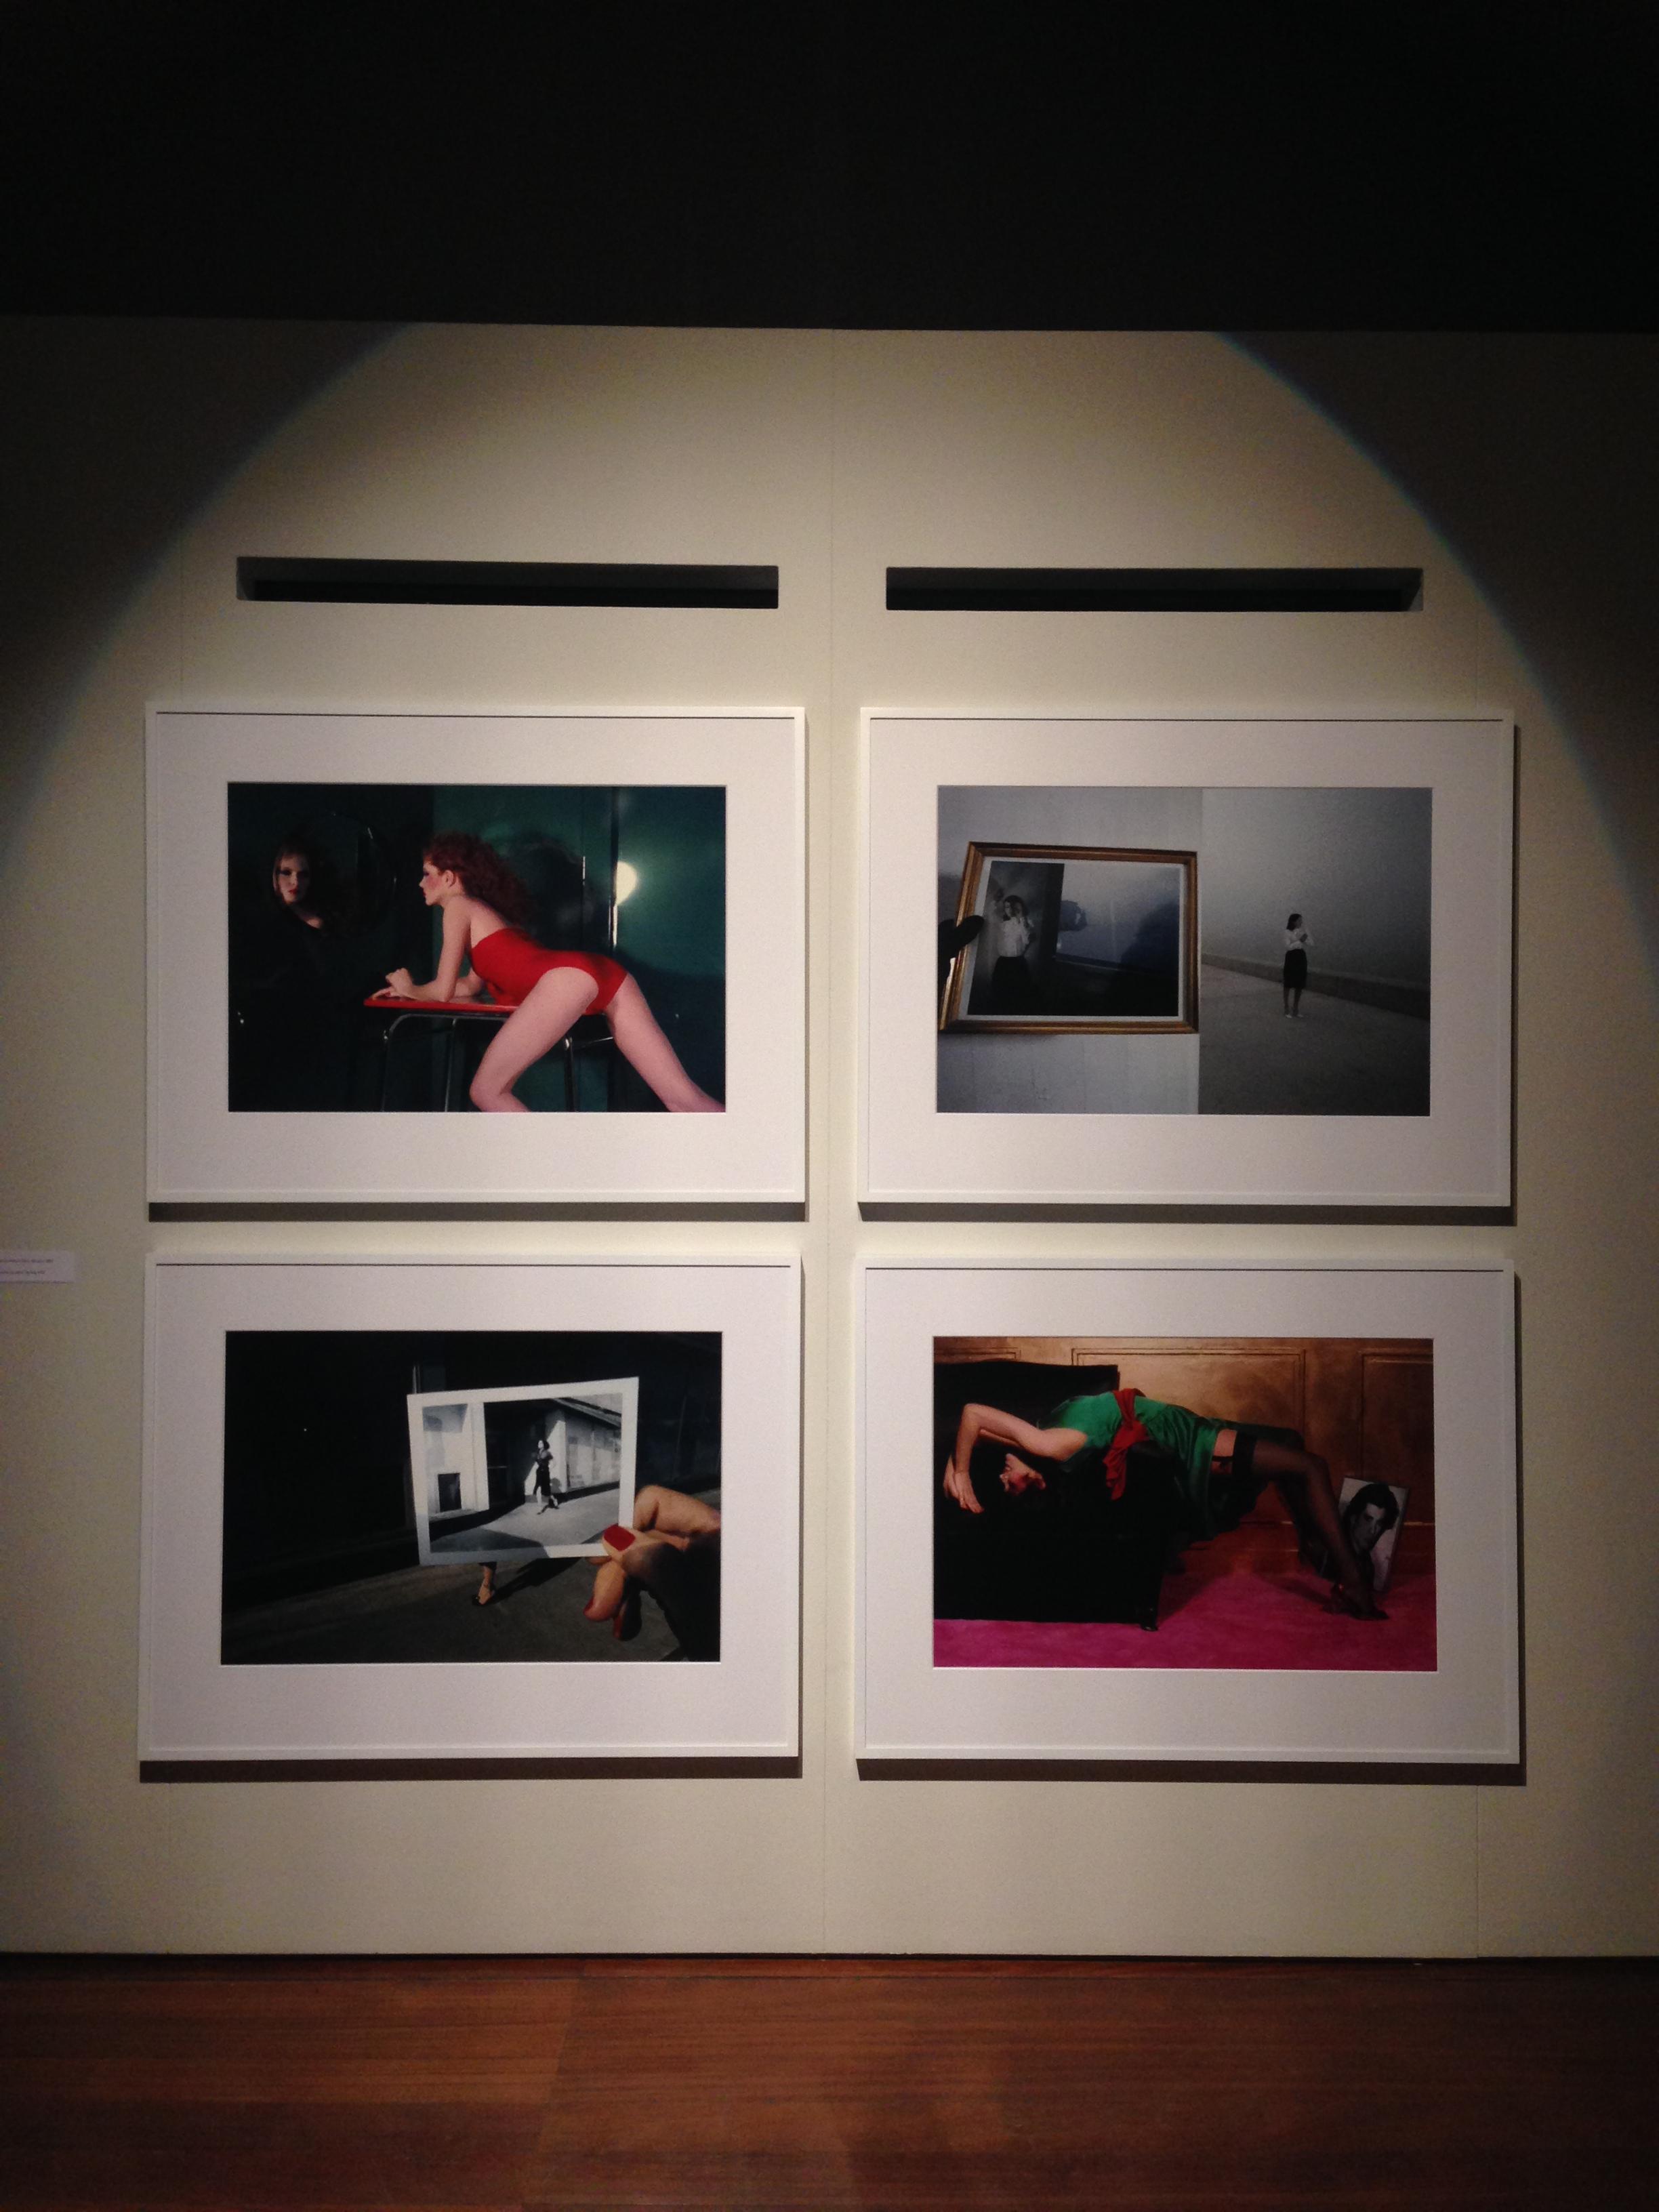 exposition-londres-photographies-guy-bourdin-somerset-house